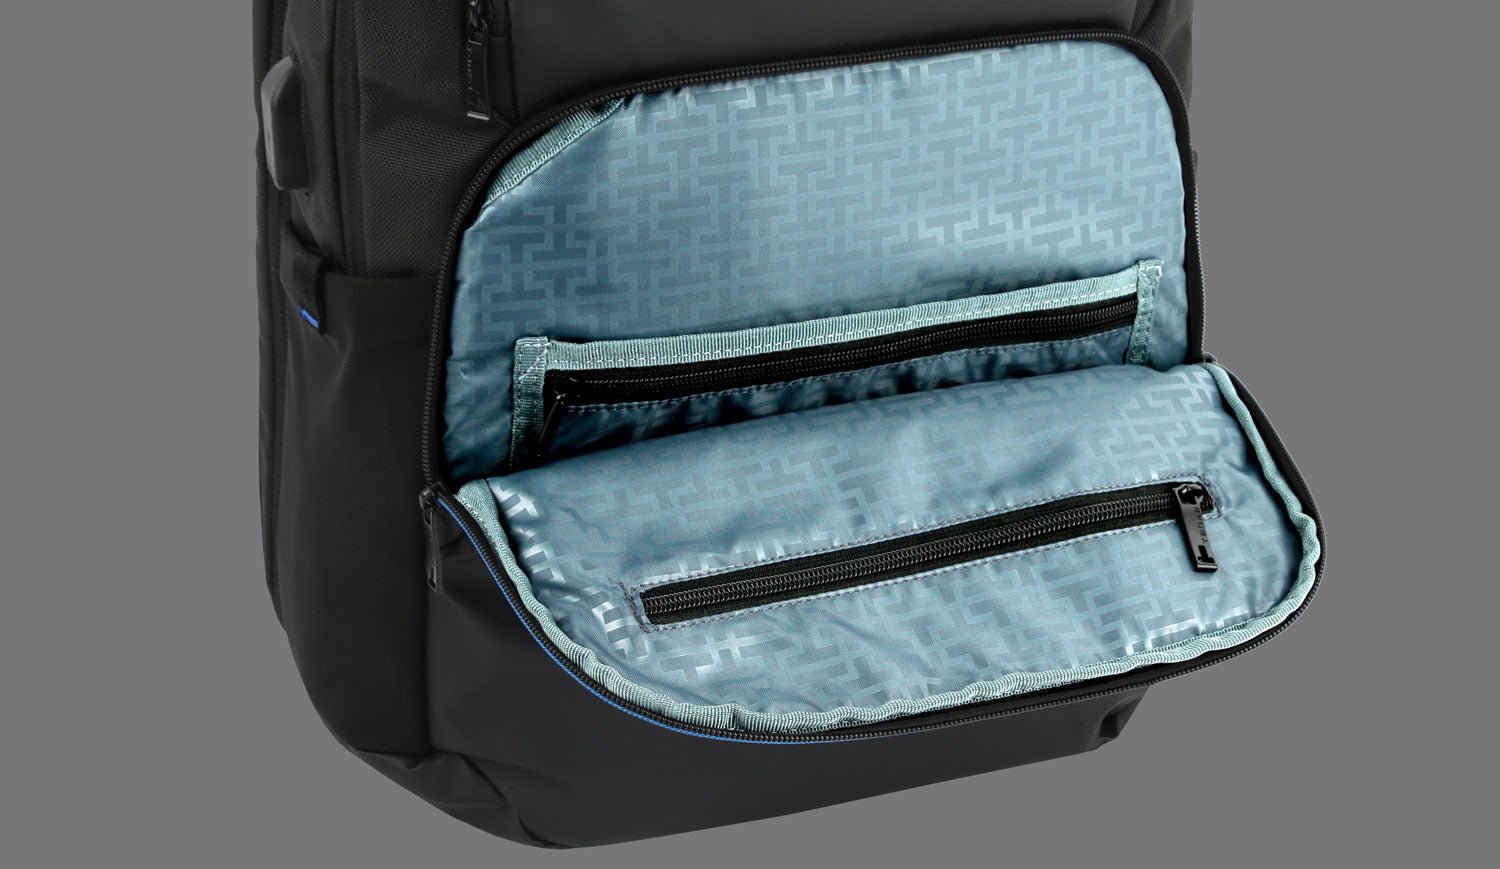 ROOMY MAIN COMPARTMENT AND CONVENIENTLY LOCATED UTILITY POCKETS WITH ORGANIZERS